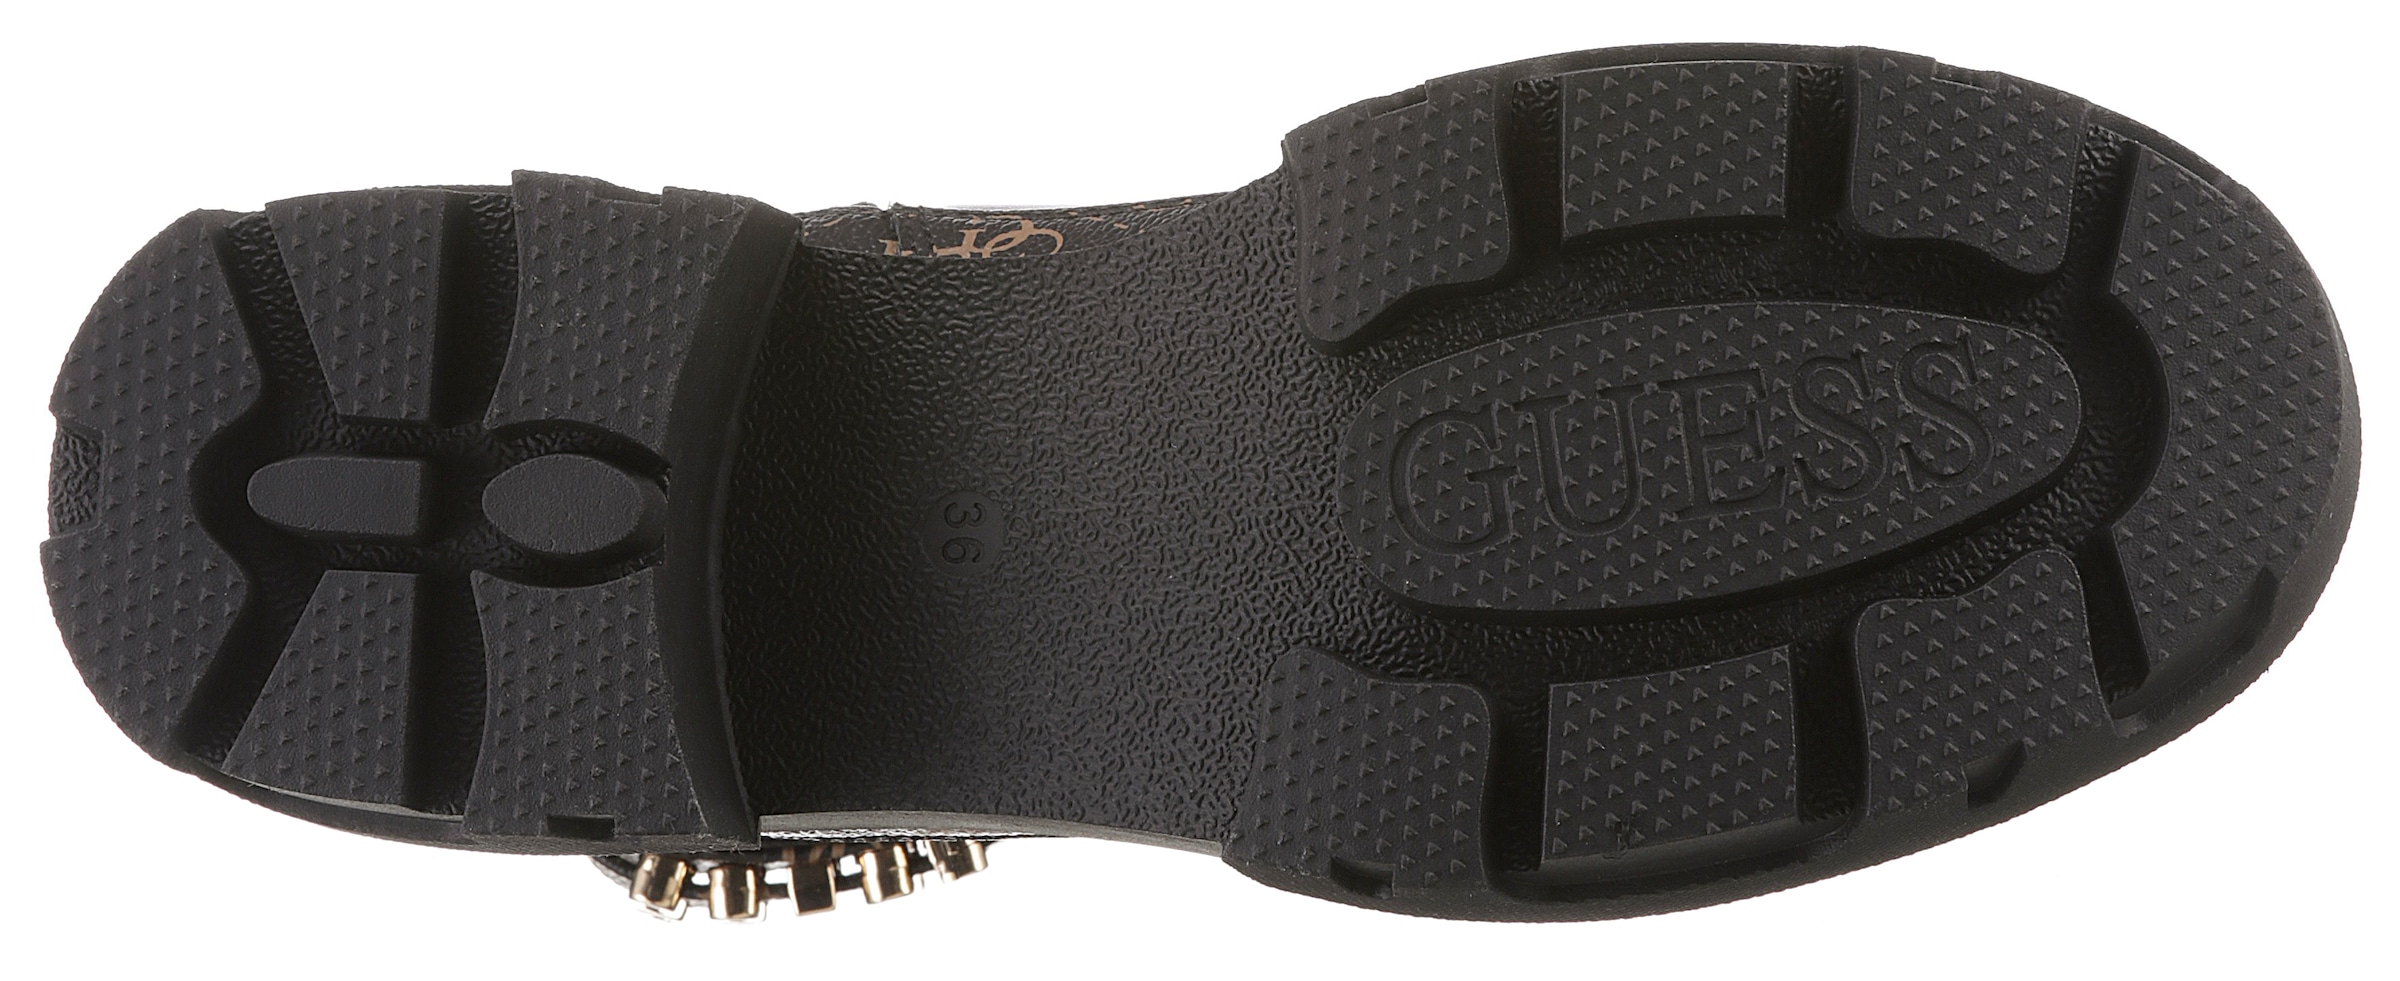 Guess Chelseaboots »YELMA«, mit GUESS-Metall-LOGO